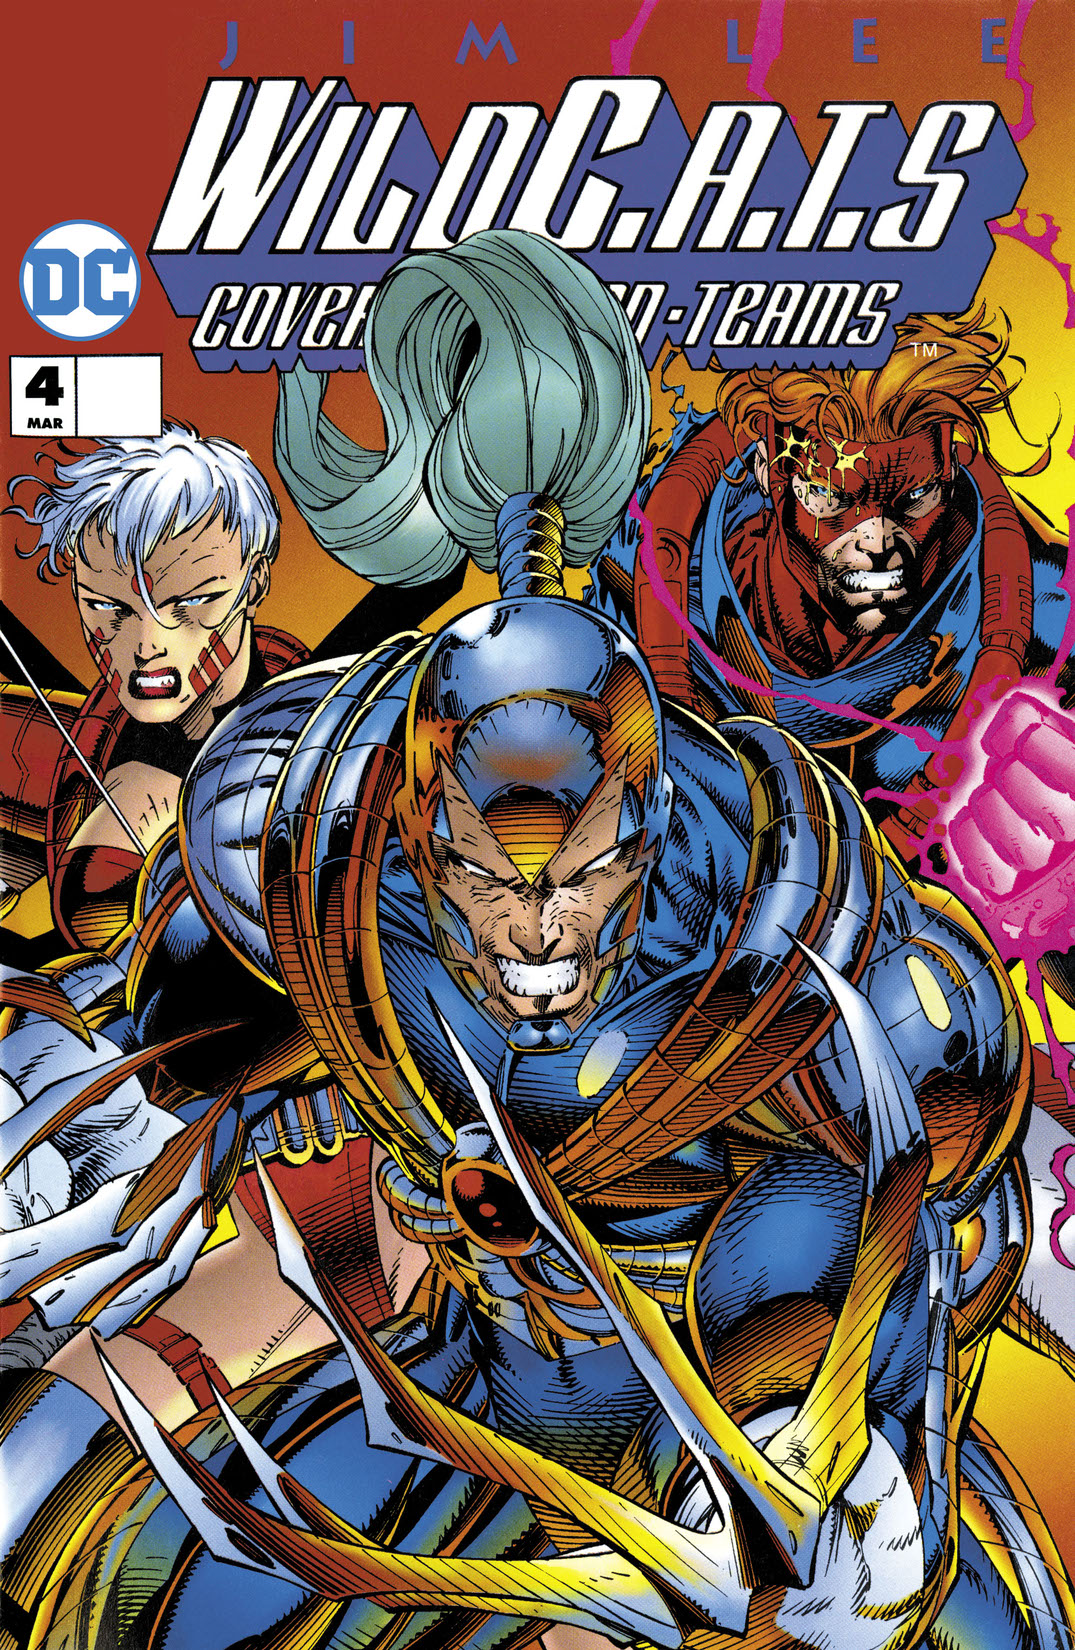 WildC.A.Ts: Covert Action Teams #4 preview images